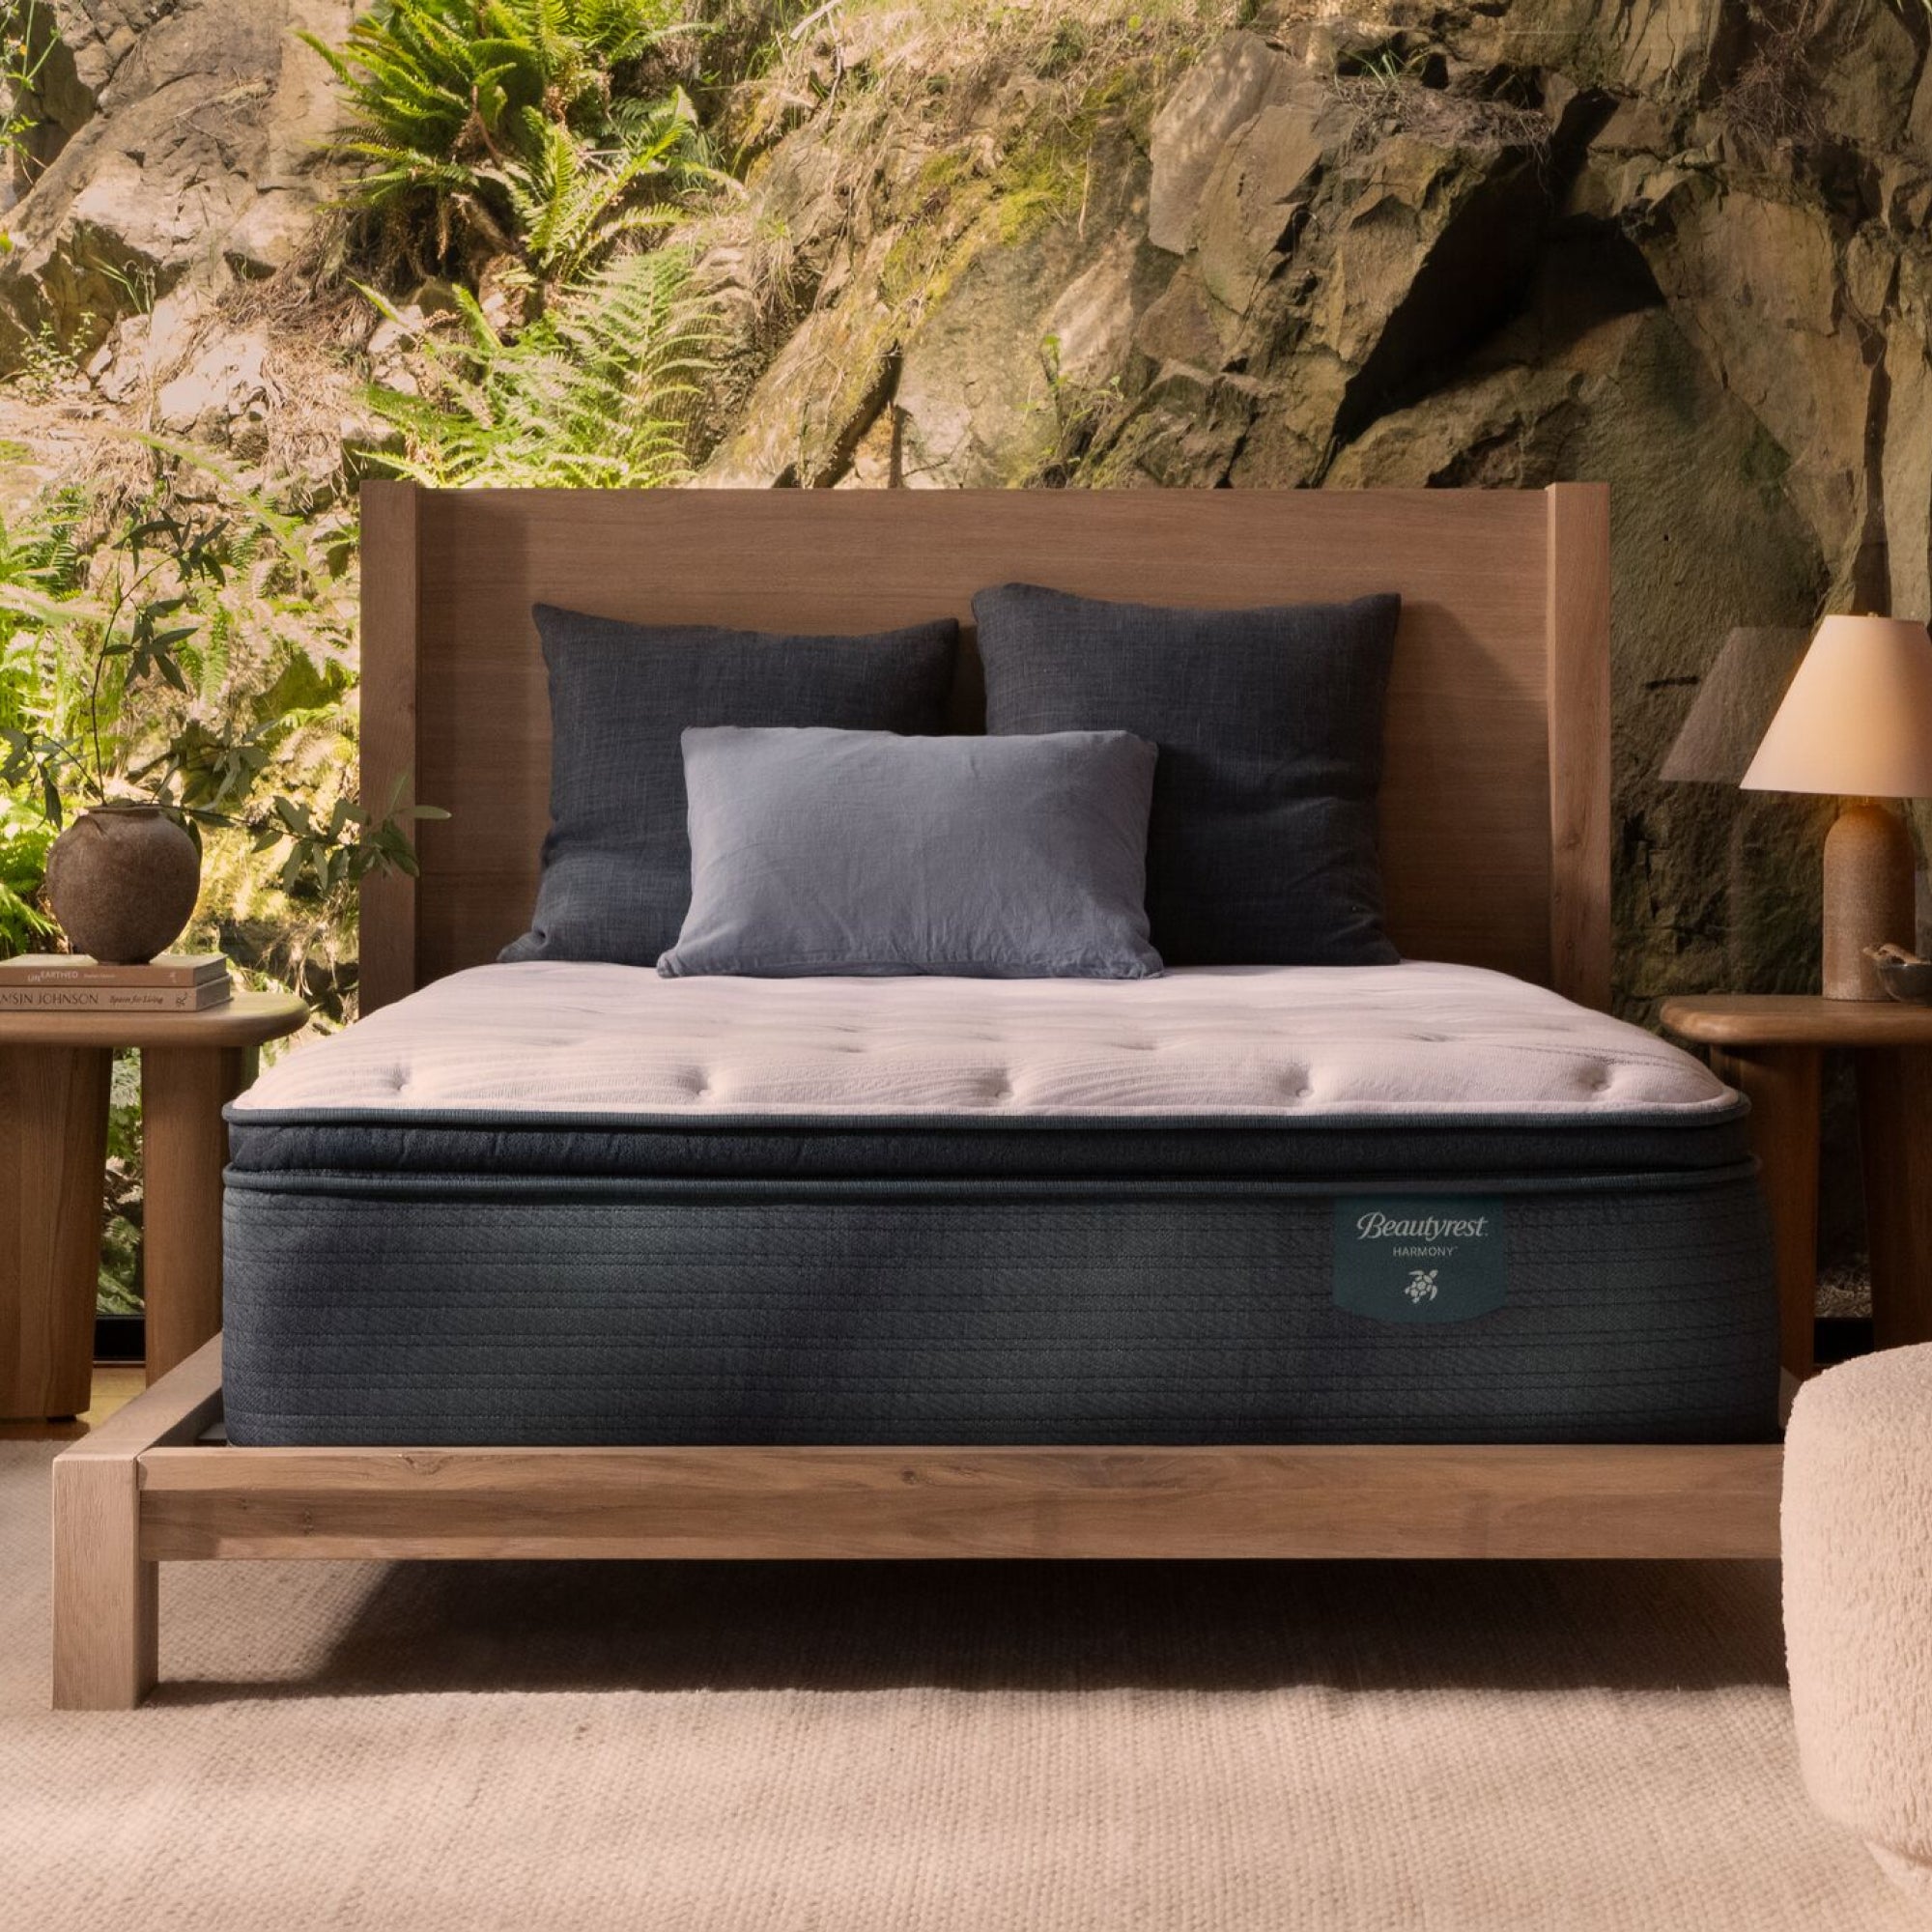 The Beautyrest Harmony mattress on a wooden bed in a bedroom || series: ExceptionalCypress Bay || feel: plush pillow top